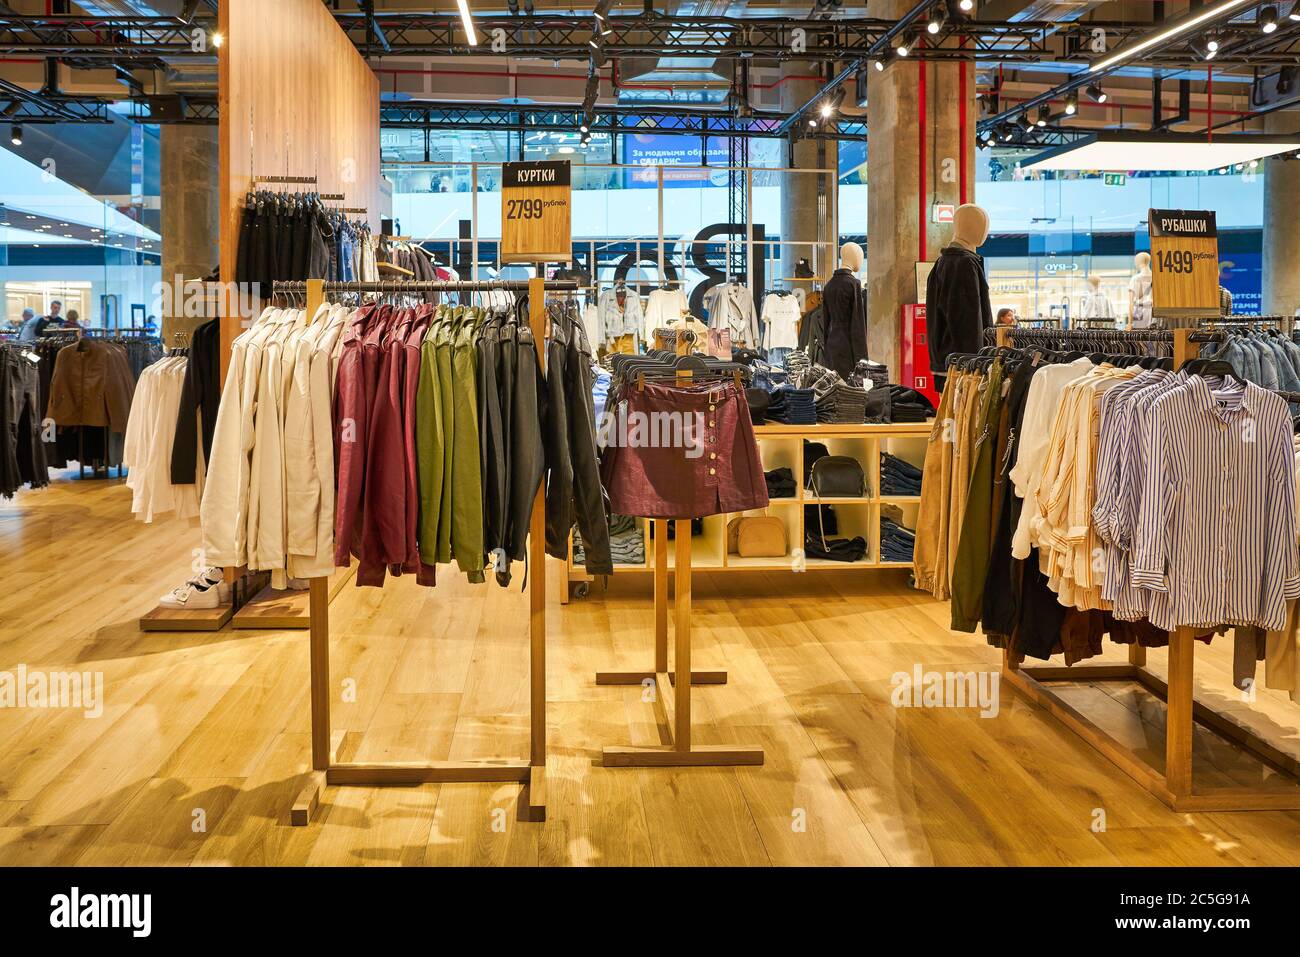 MOSCOW, RUSSIA - SEPTEMBER 14, 2019: interior shot of Bershka store at  Salaris shopping mall in Moscow Stock Photo - Alamy